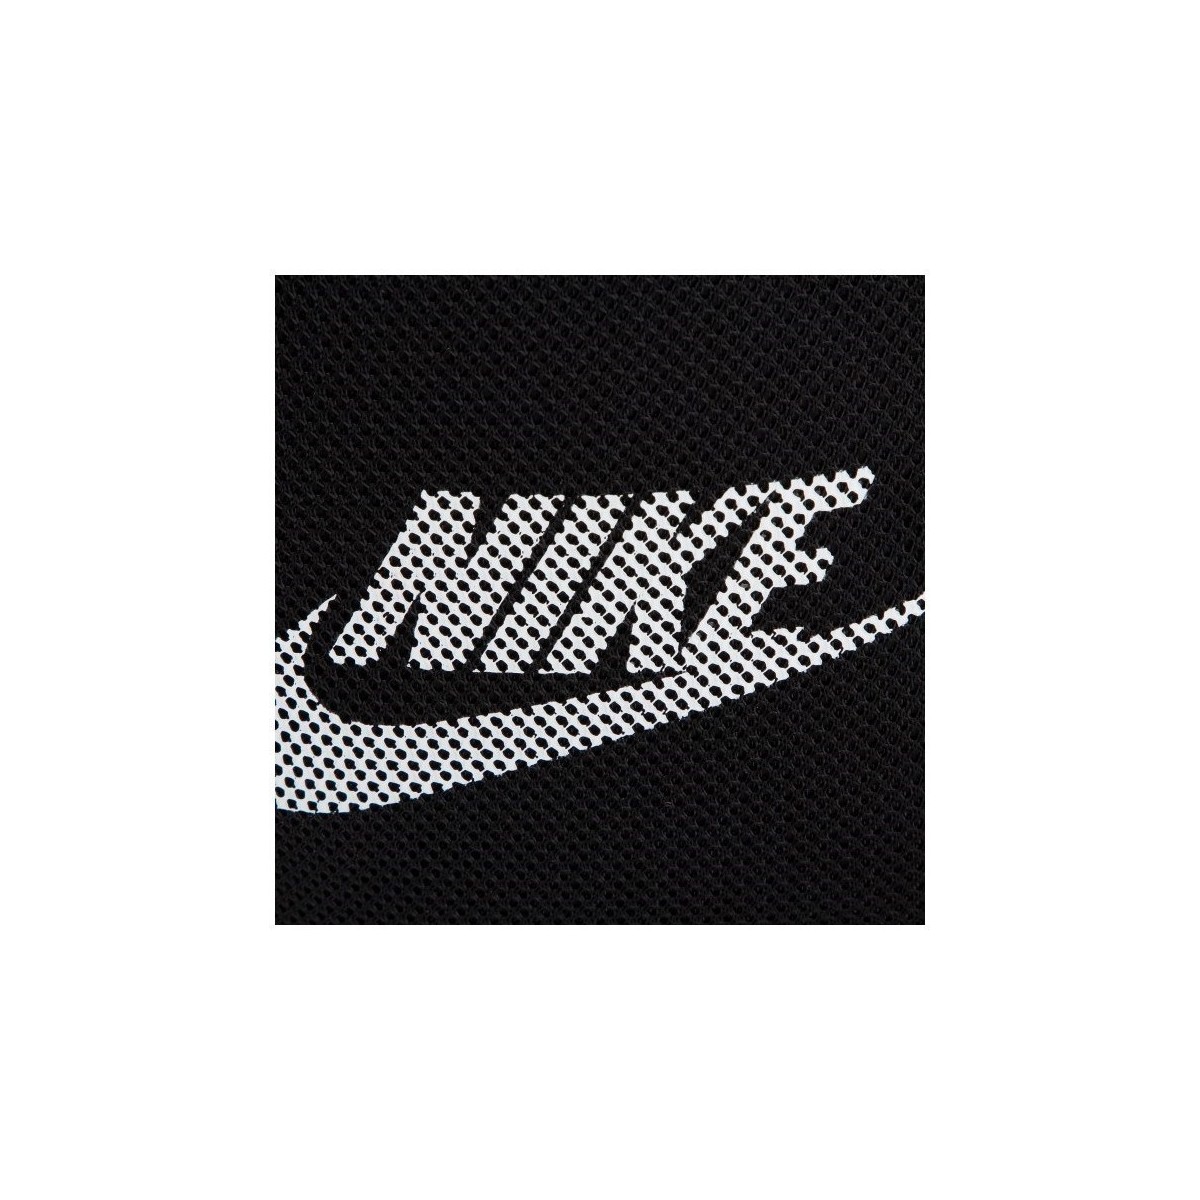 Nike Noir Heritage S Smit Small Items Bag PAlCeD6H